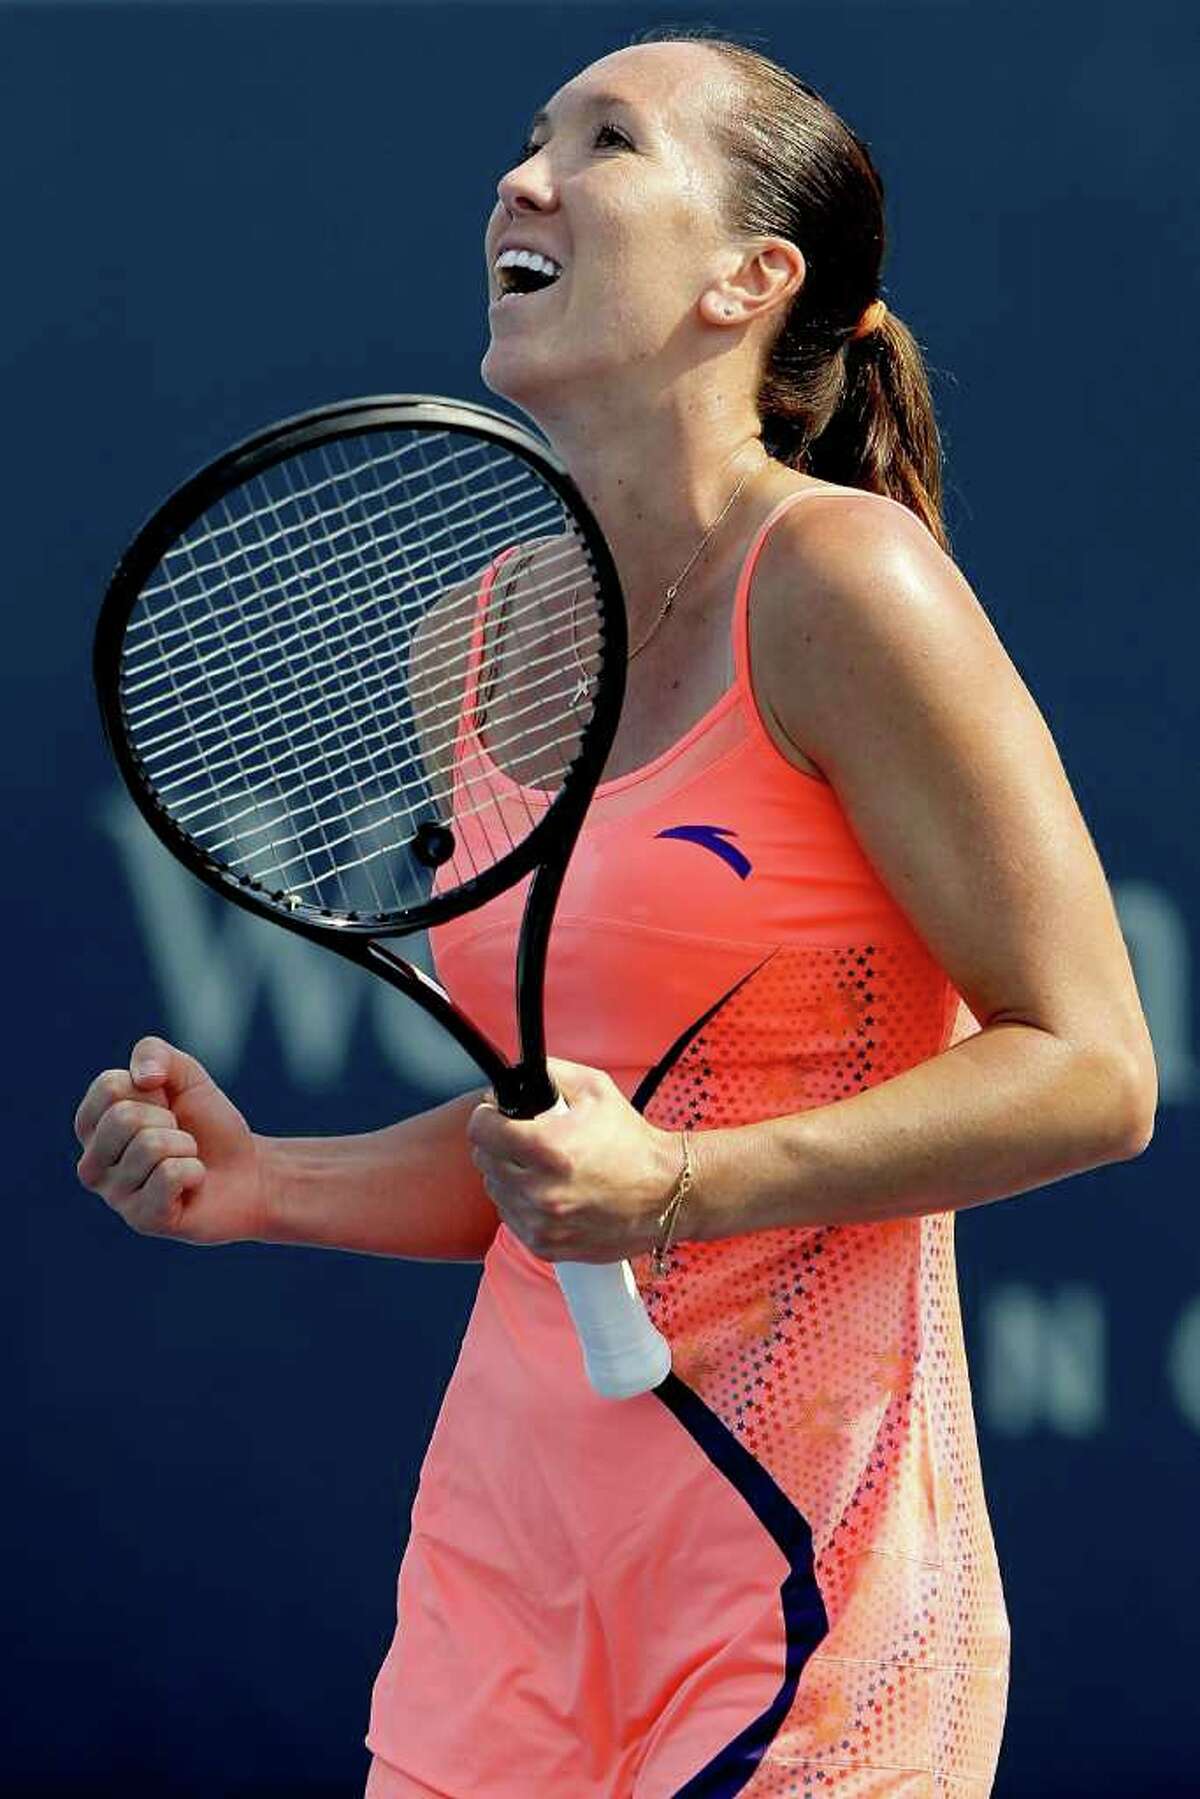 MASON, OH - AUGUST 17: Jelena Jankovic of Serbia celebrates match point Jie Zheng of China during the Western & Southern Open at the Lindner Family Tennis Center on August 17, 2011 in Mason, Ohio. (Photo by Matthew Stockman/Getty Images)